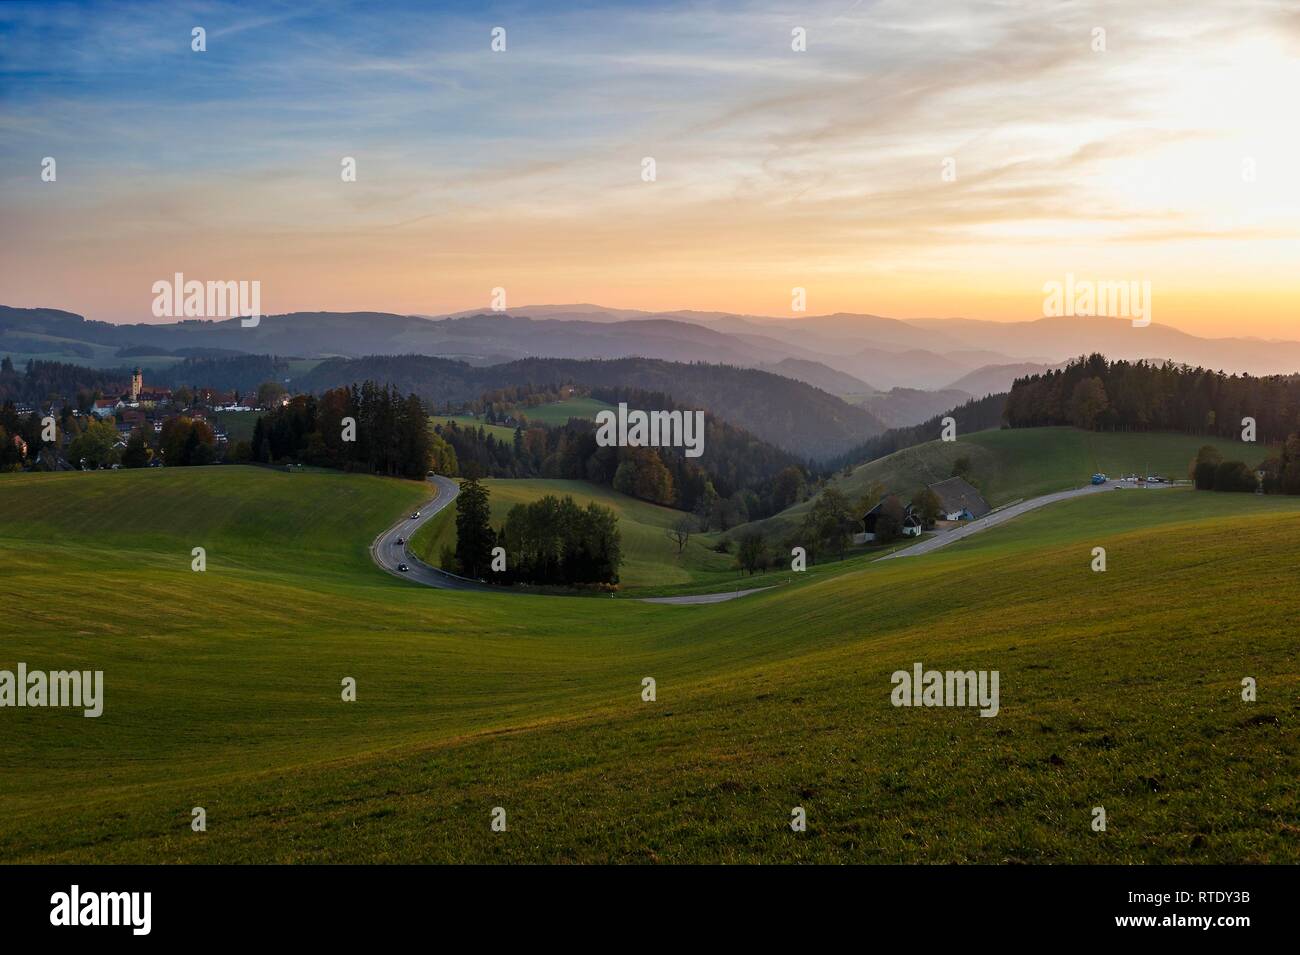 View of hilly landscape in autumn, partly wooded, evening light, near St Märgen, Black Forest, Baden-Württemberg, Germany Stock Photo